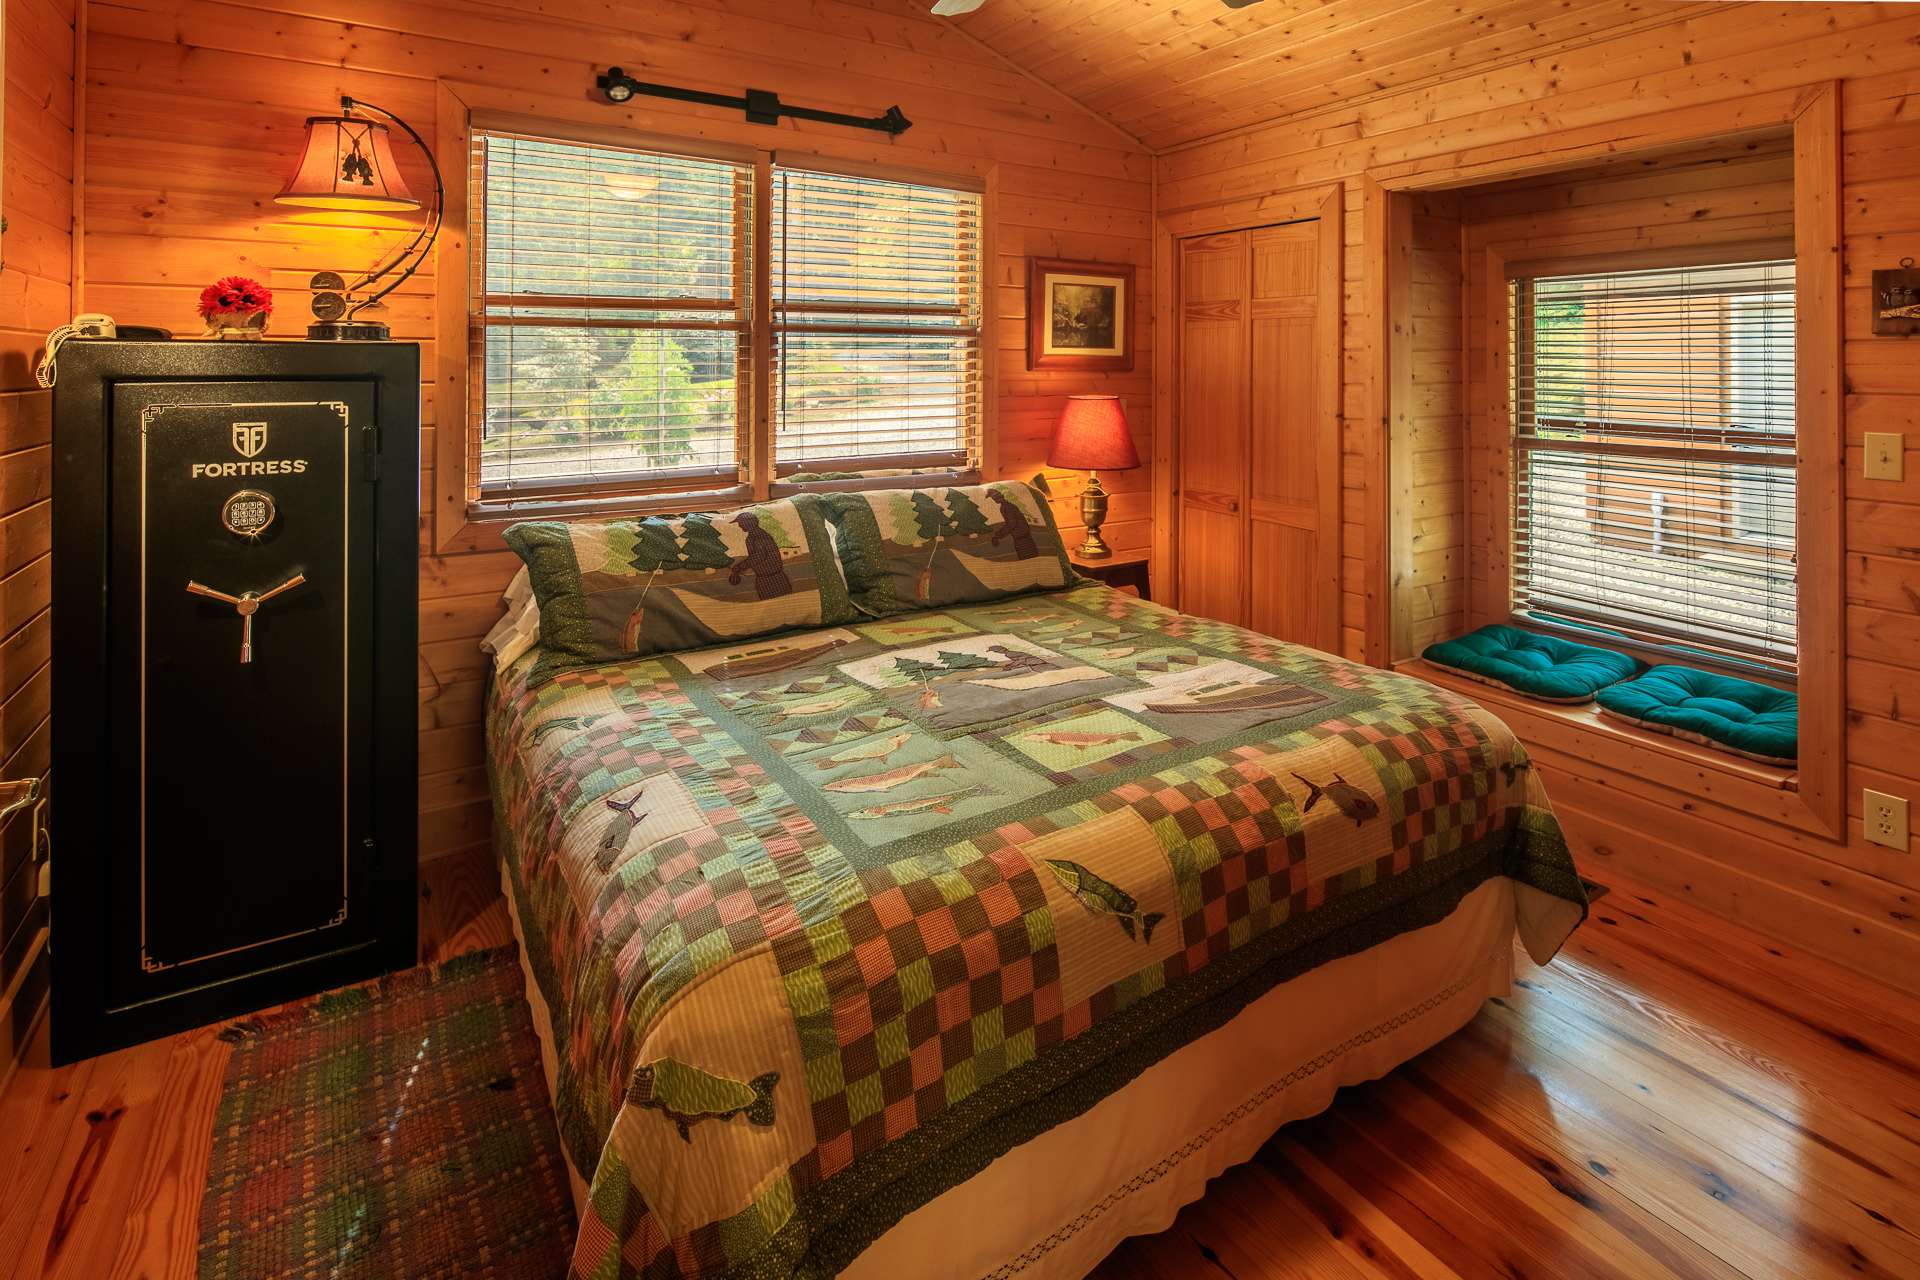 The guest bedroom is generously sized and also offers a vaulted ceiling and plenty of windows.